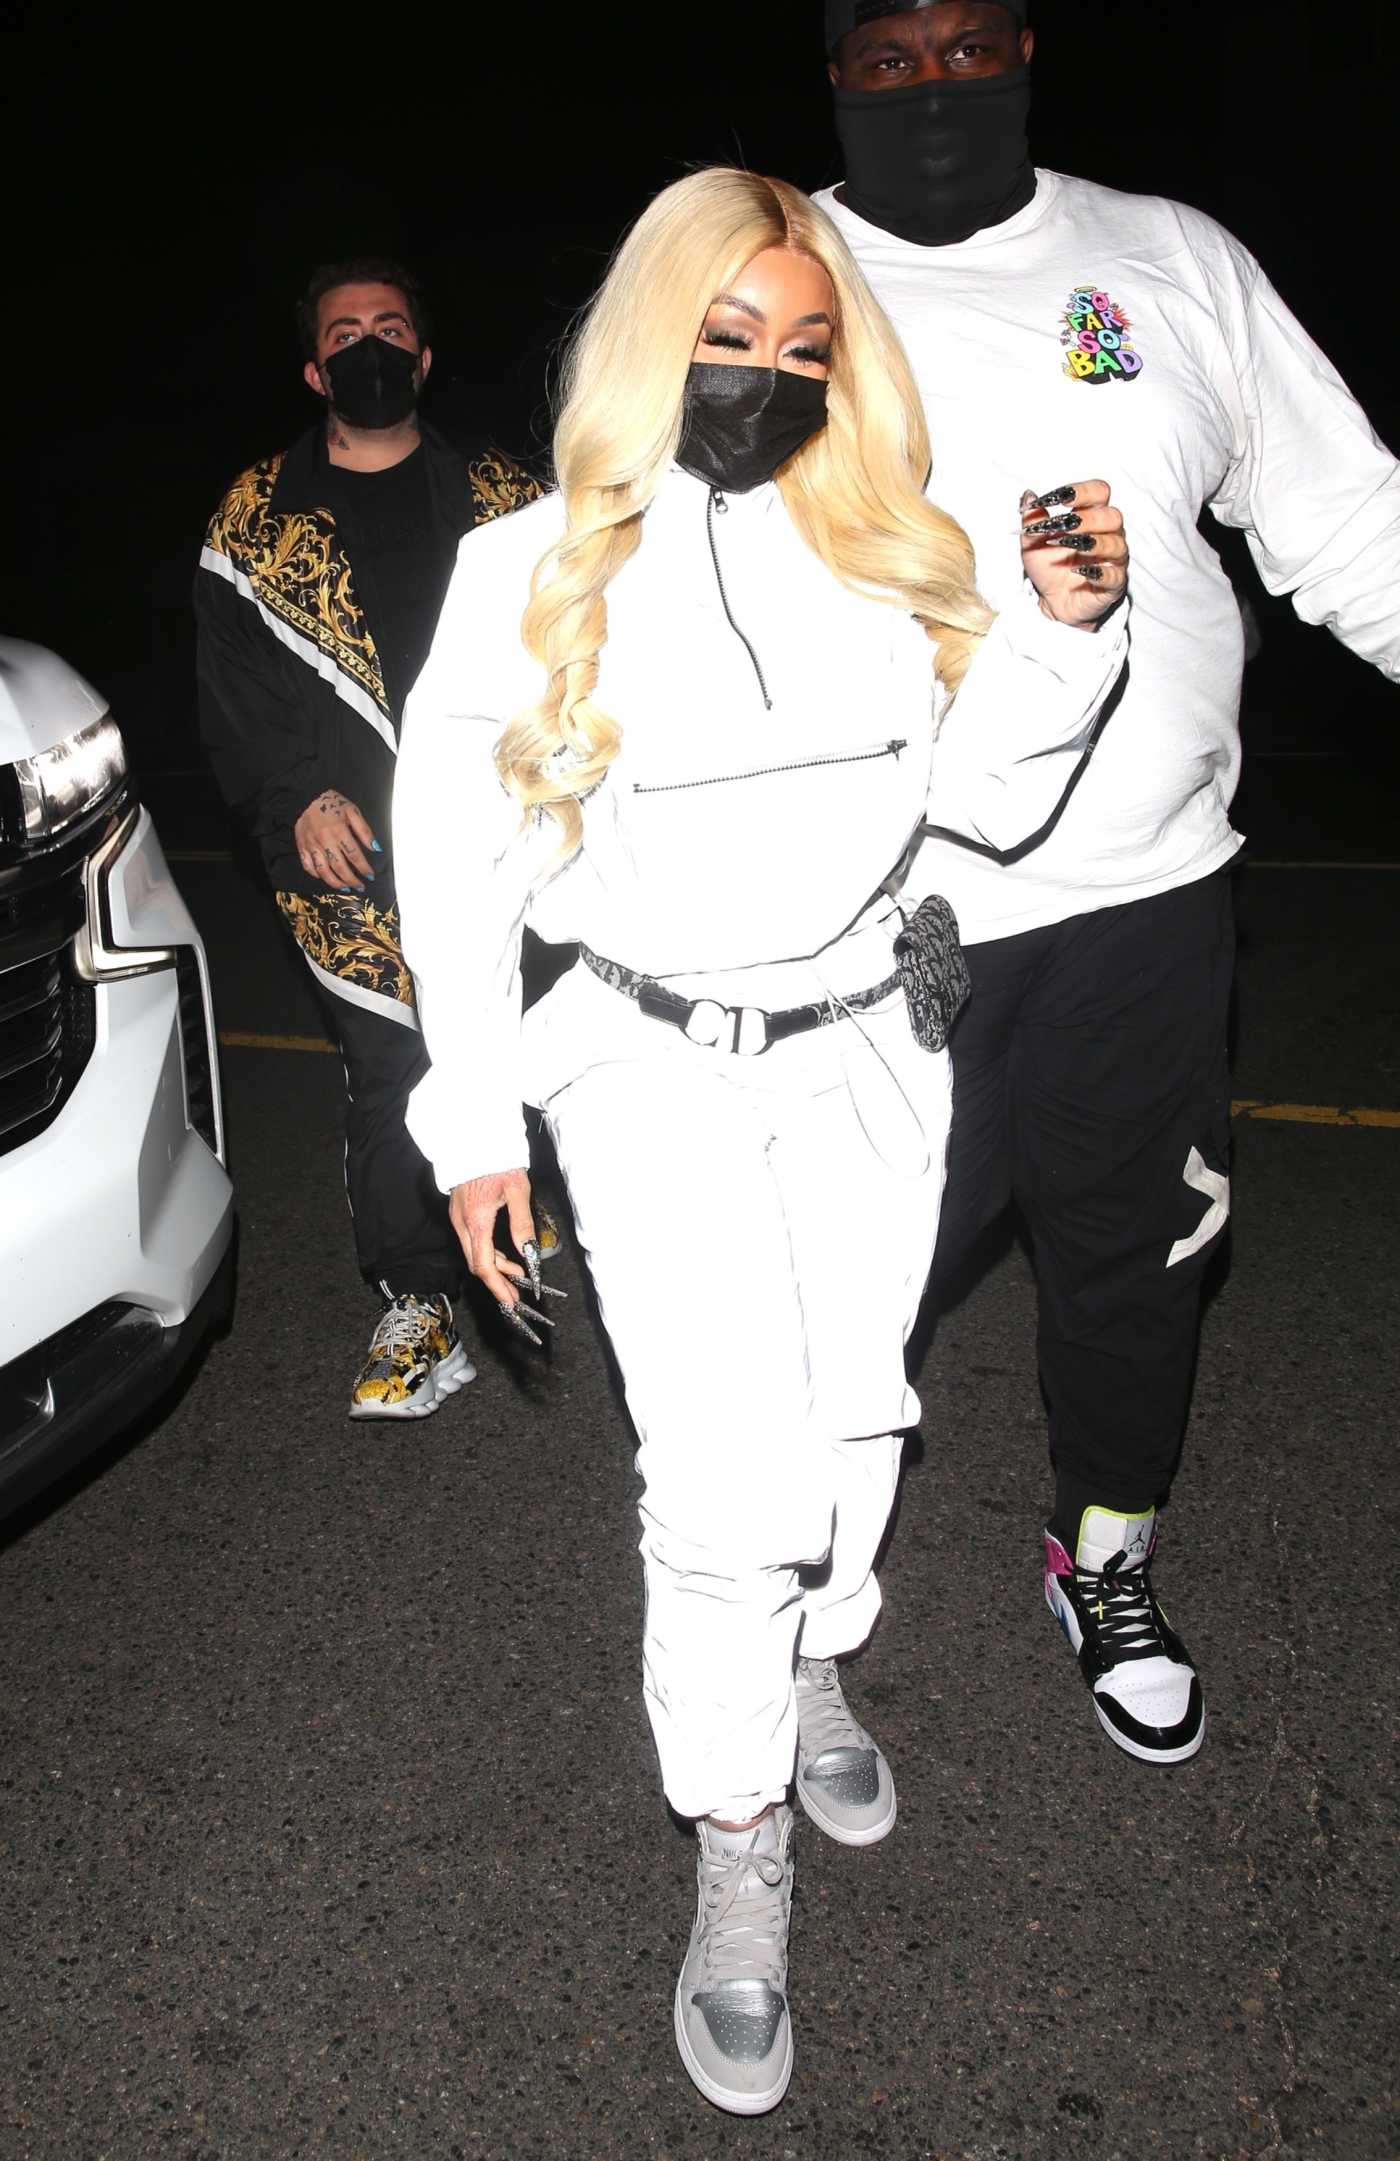 Blac Chyna in a White Tracksuit Arrives at Giorgio Baldi Italian Restaurant in Los Angeles 03/17/2021